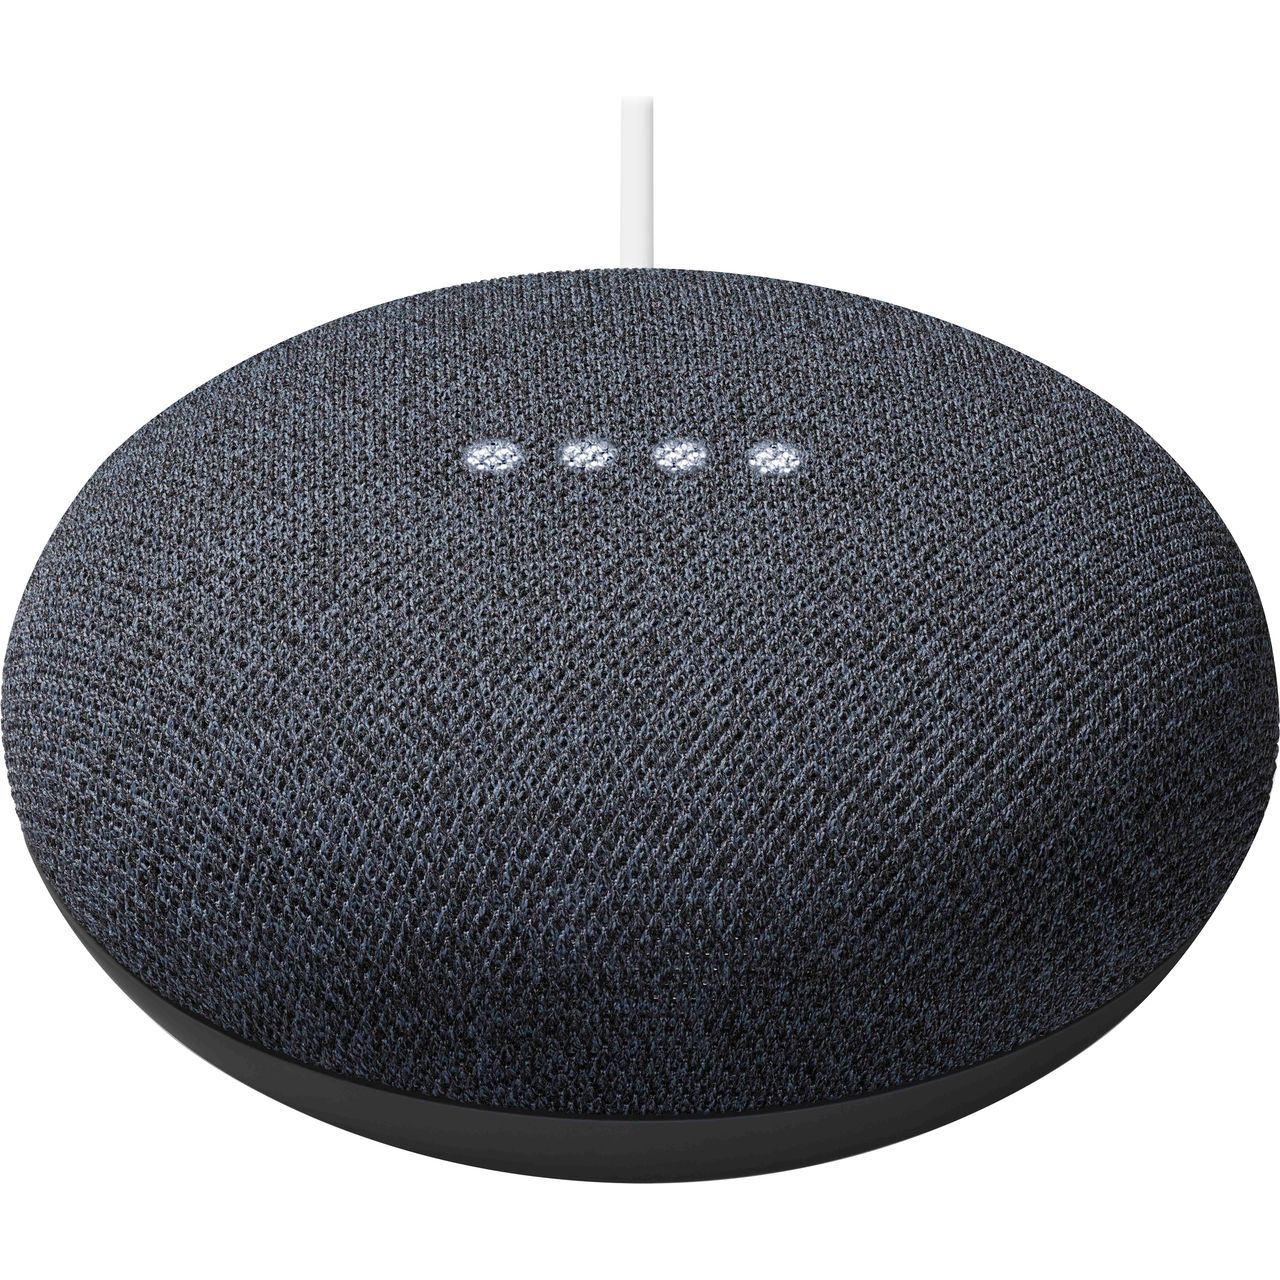 Google Nest Mini with Google Assistant Review